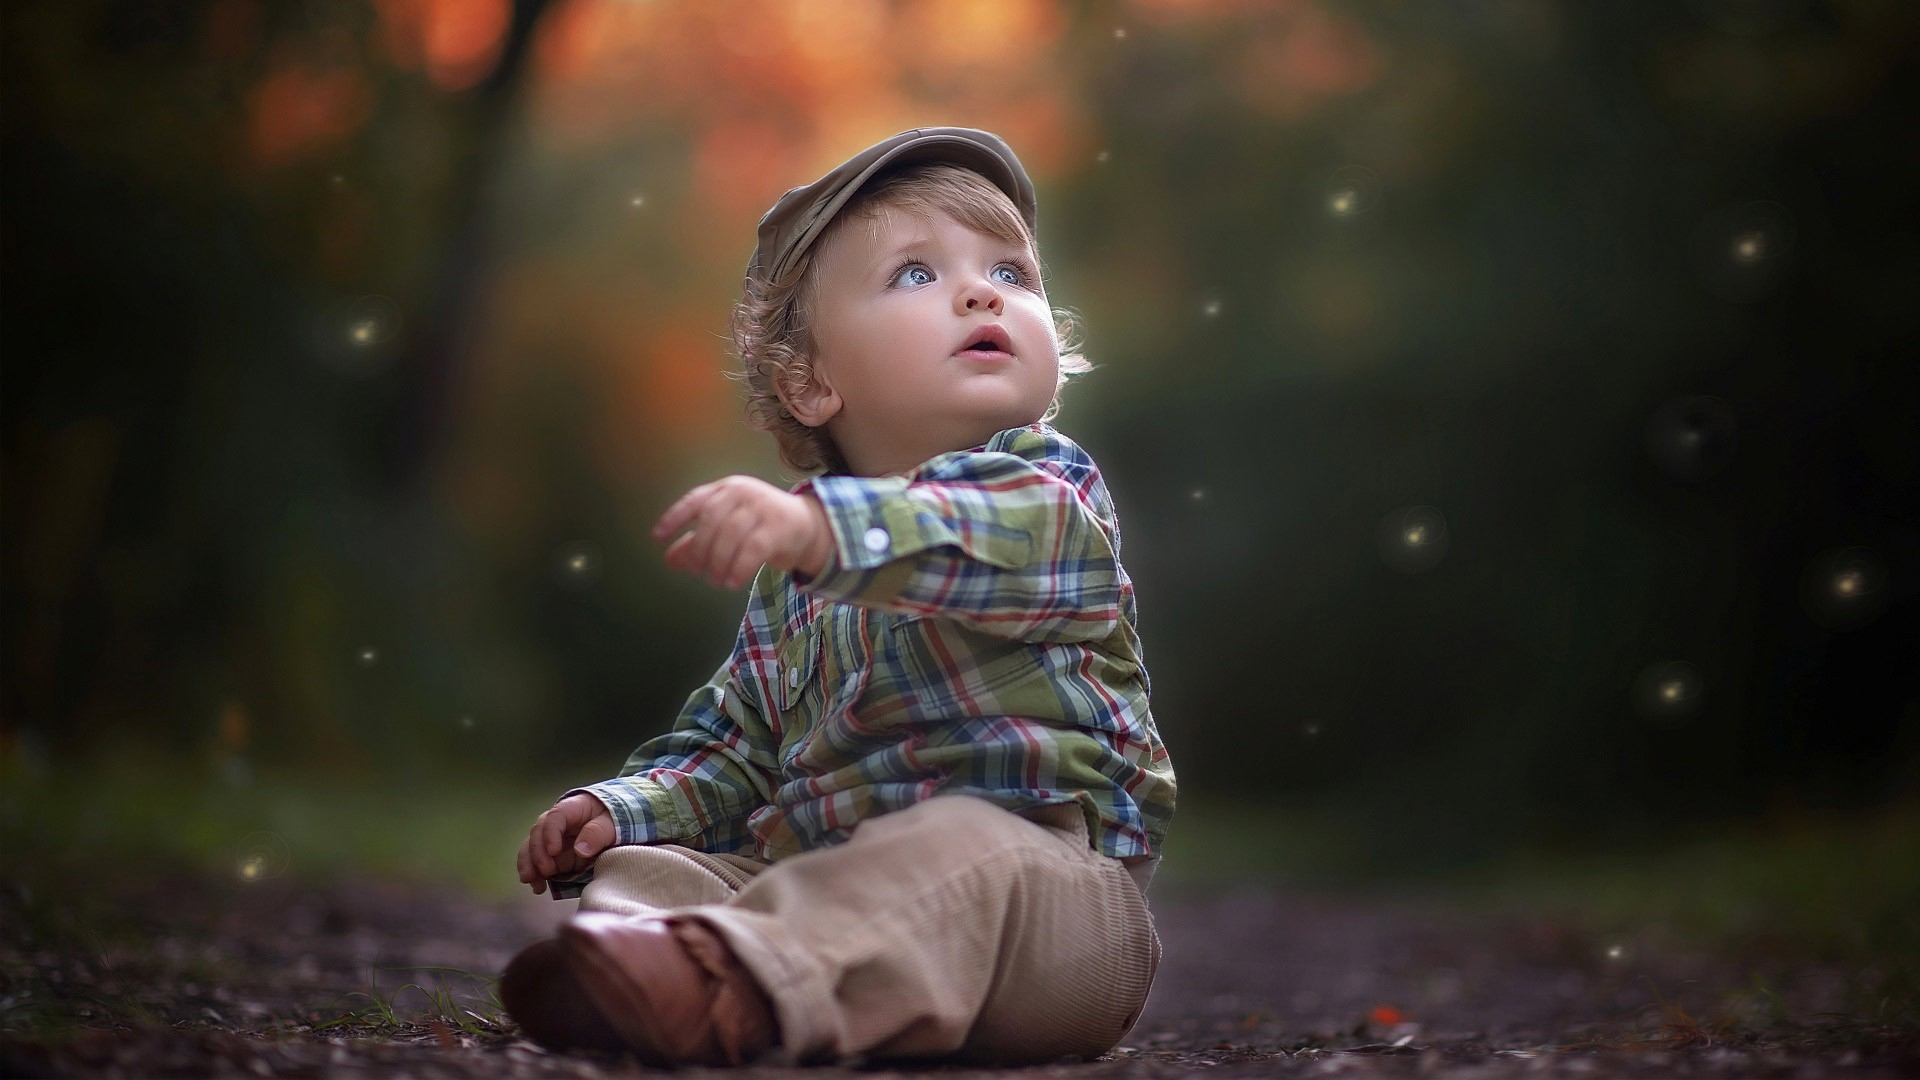 Cute Baby Boy Pictures Wallpapers - Full Hd Cute Baby - HD Wallpaper 